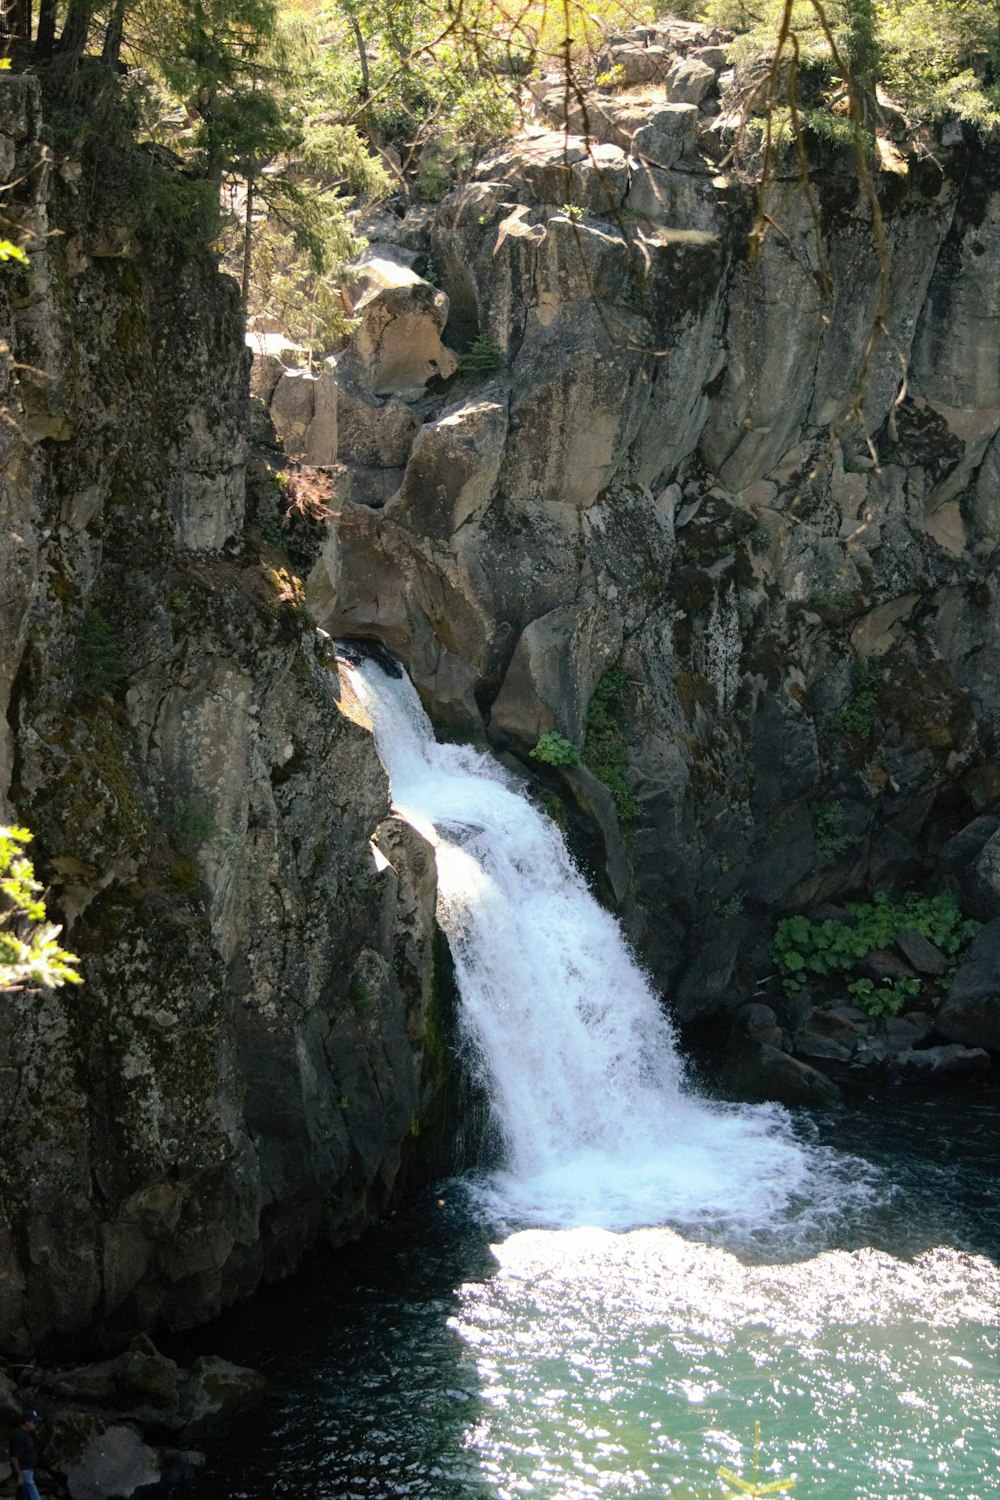 a small waterfall flowing into a river surrounded by rocks